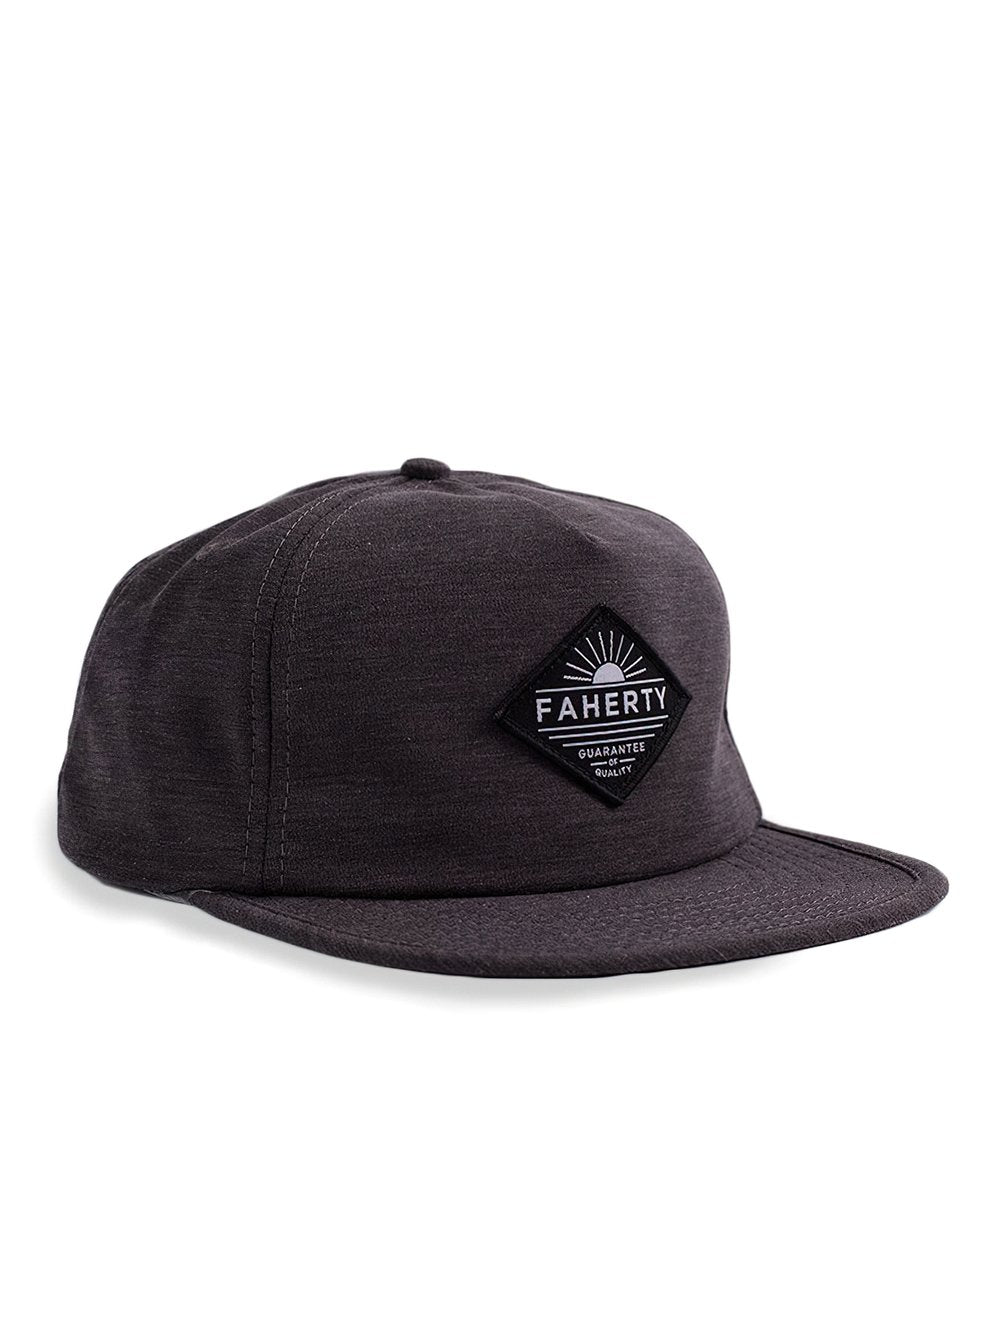 ALL DAY HAT - CHARCOAL